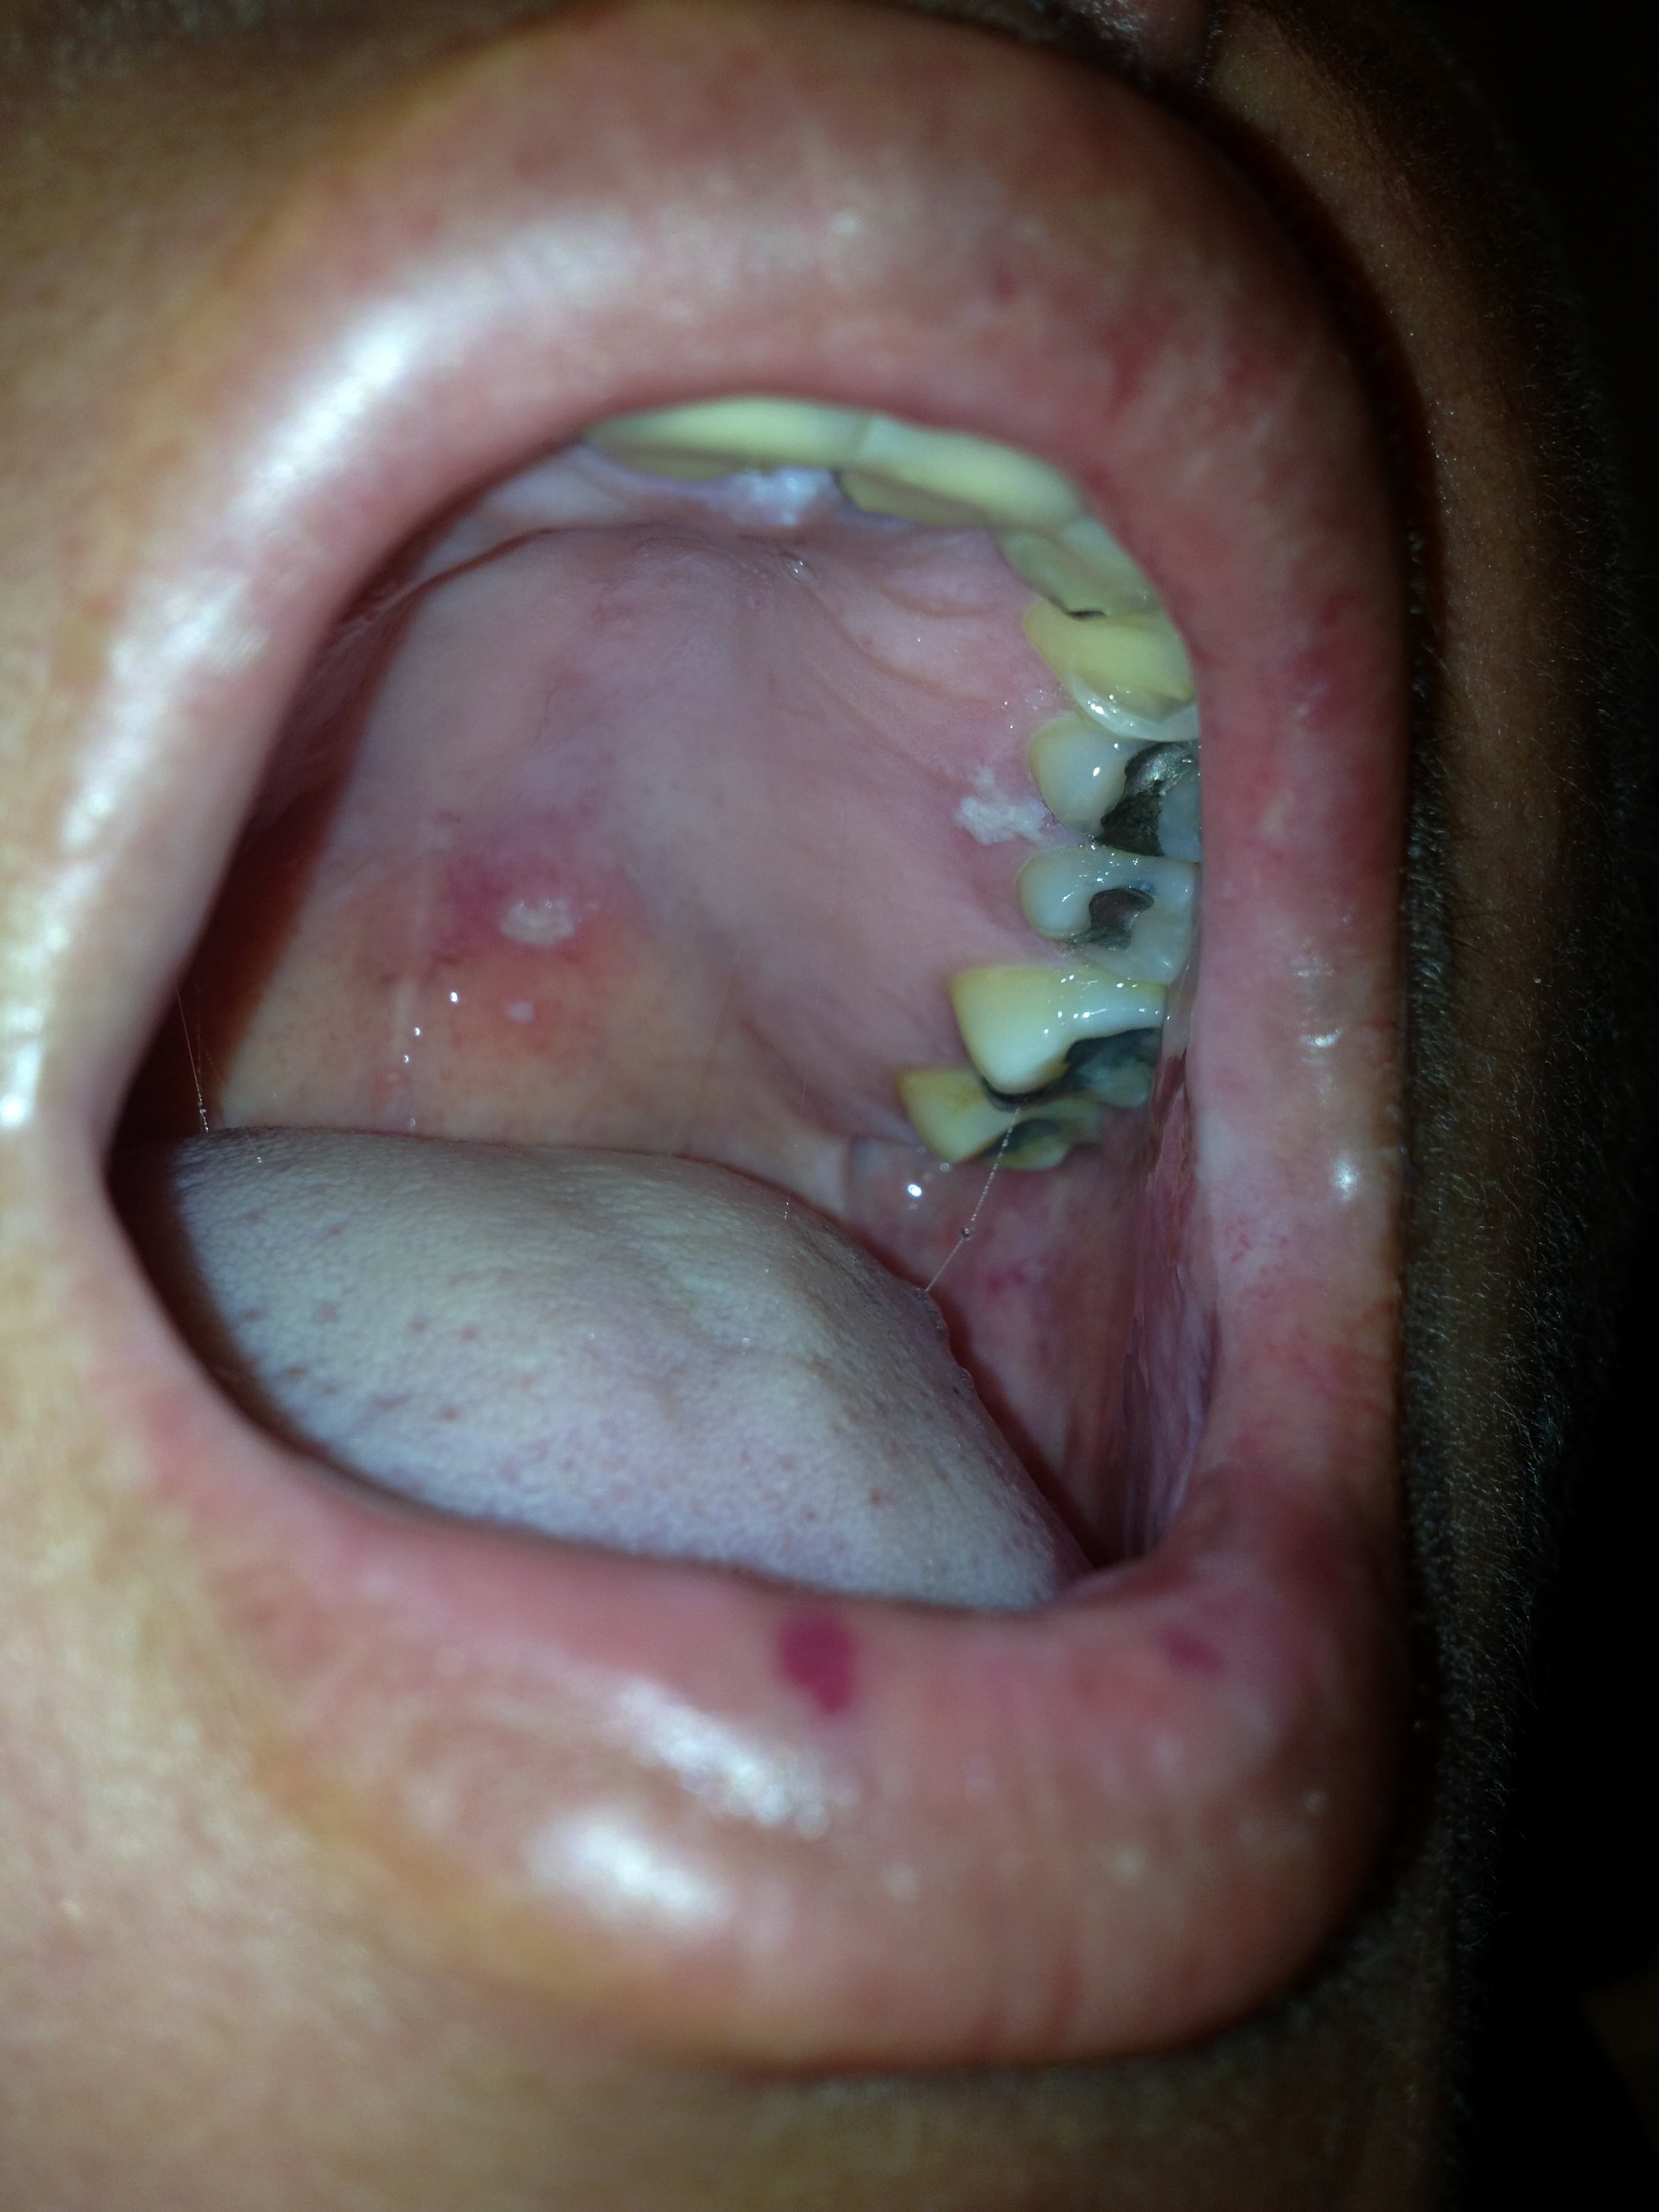 Herpes Zoster Ophthalmicus Extending to the Palate